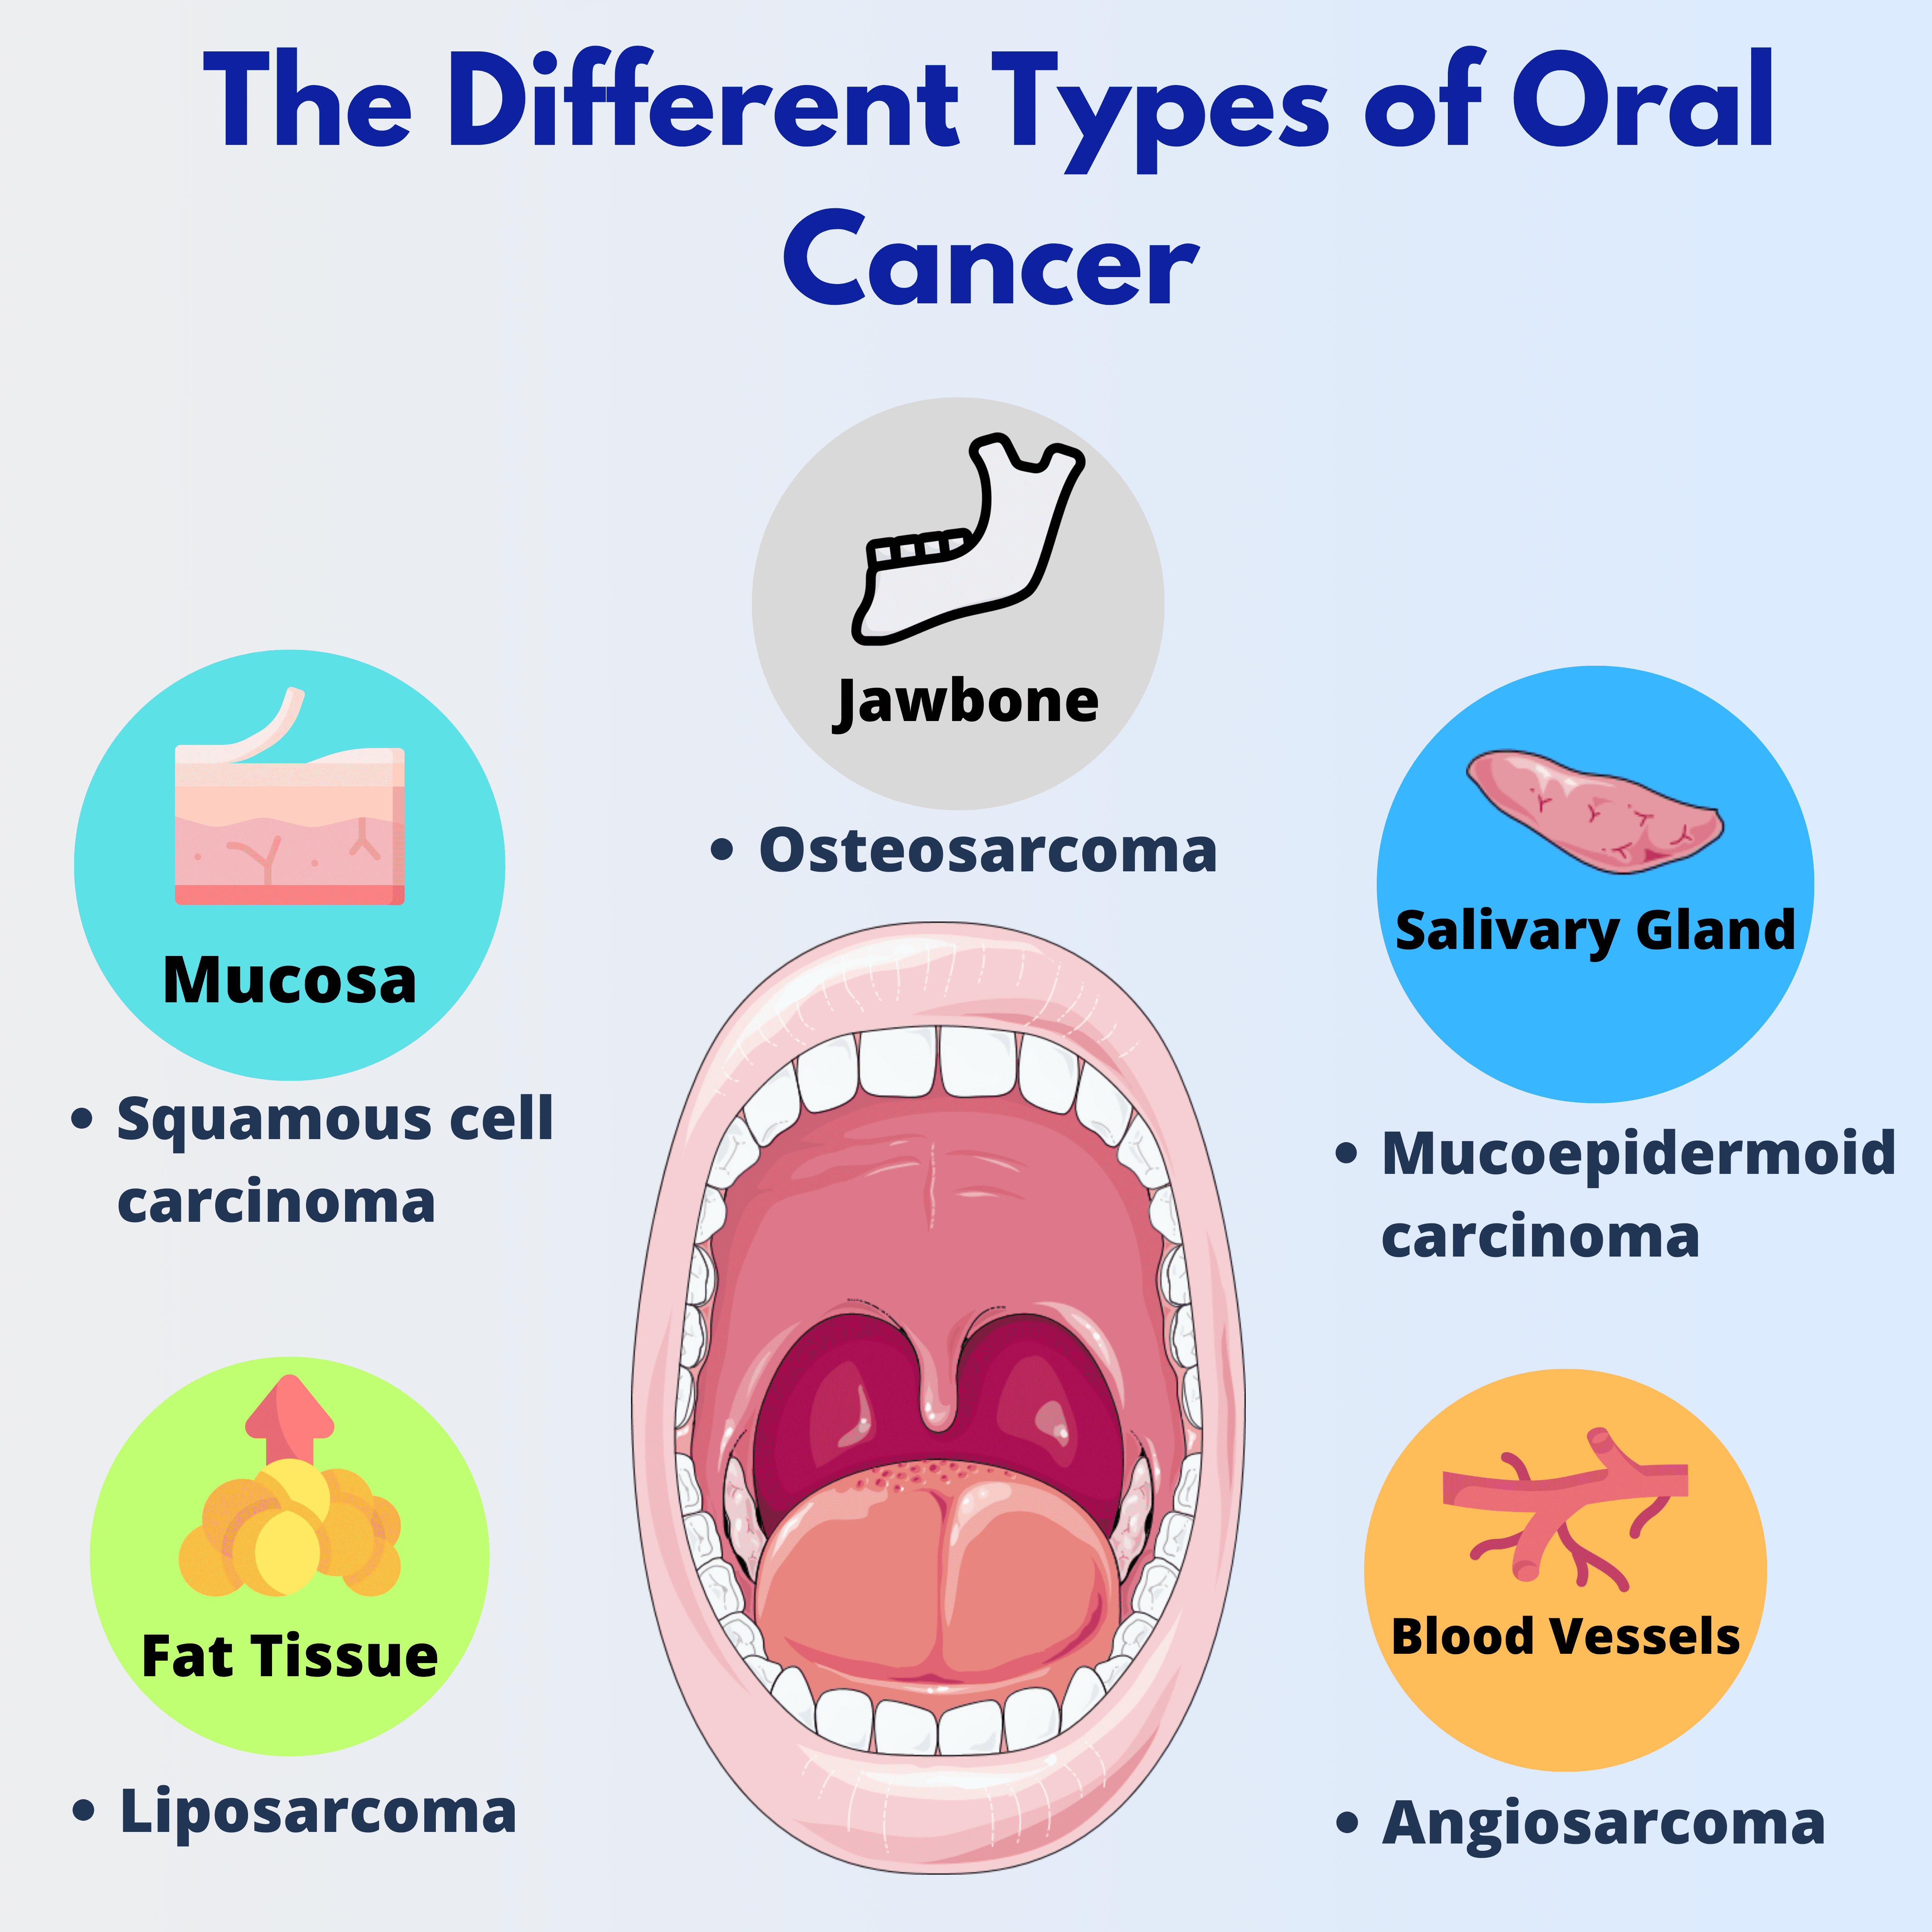 The different types of oral cancer depending on the tissue from which it originates